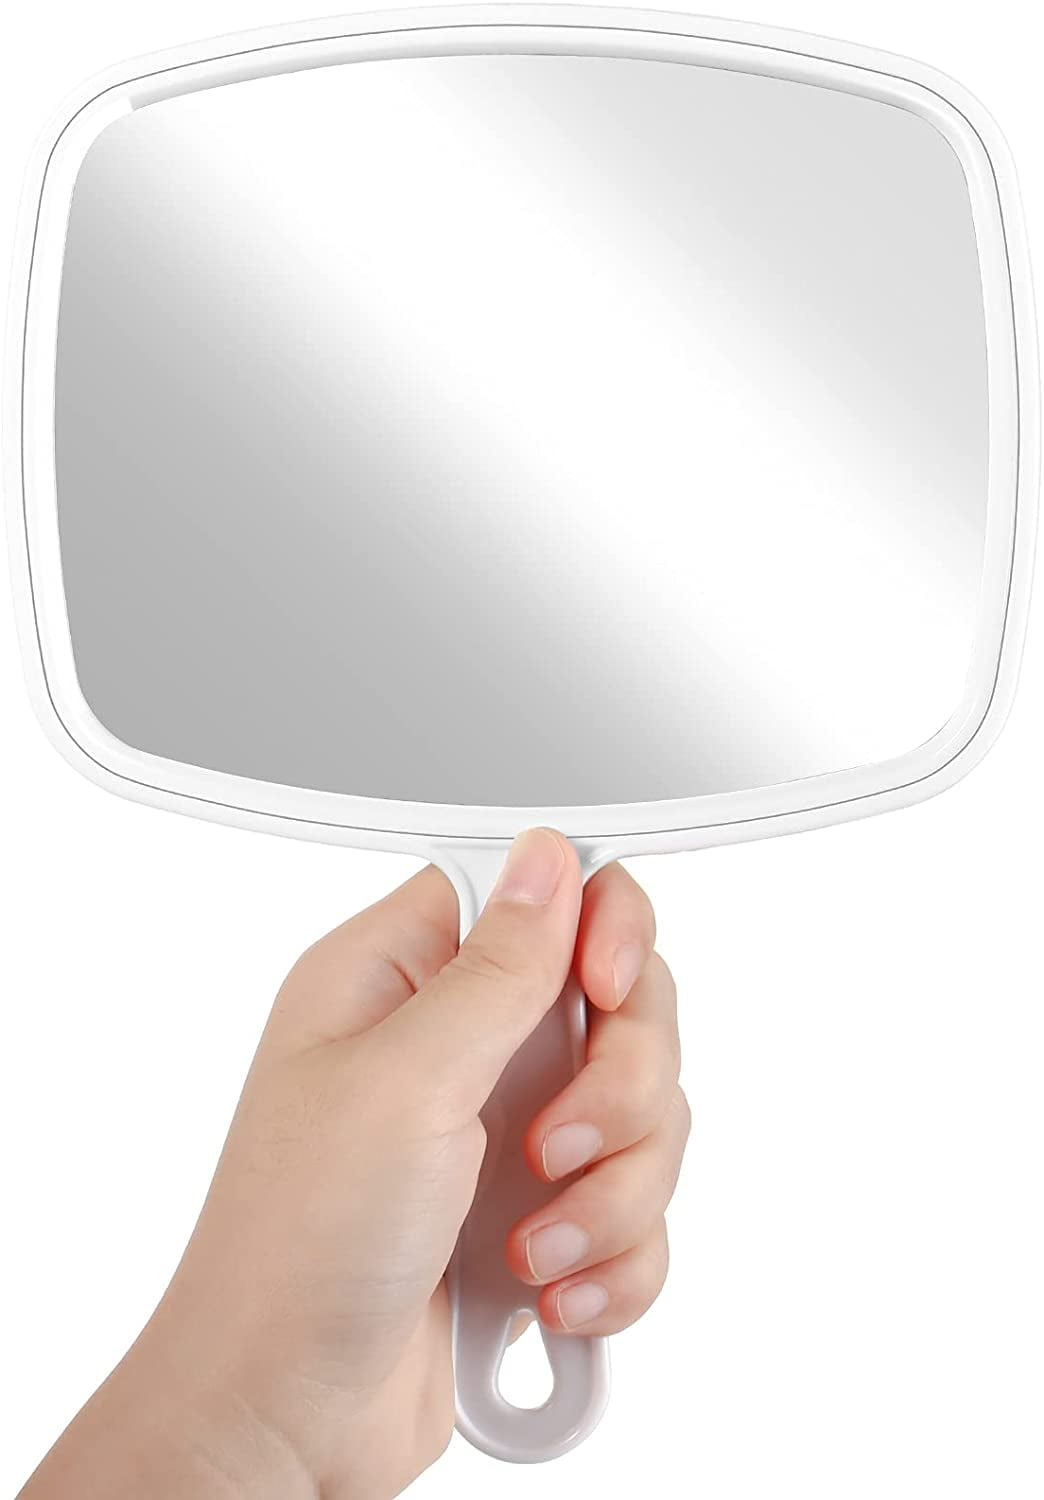 Square Hand Mirror Handheld Makeup Mirror Hand Mirror with Handle Compact Hand Mirror Handheld Plain Mirror for Shaving Makeup Hair Facial Care Hair Cutting Tool Hairdressing and Beauty White 